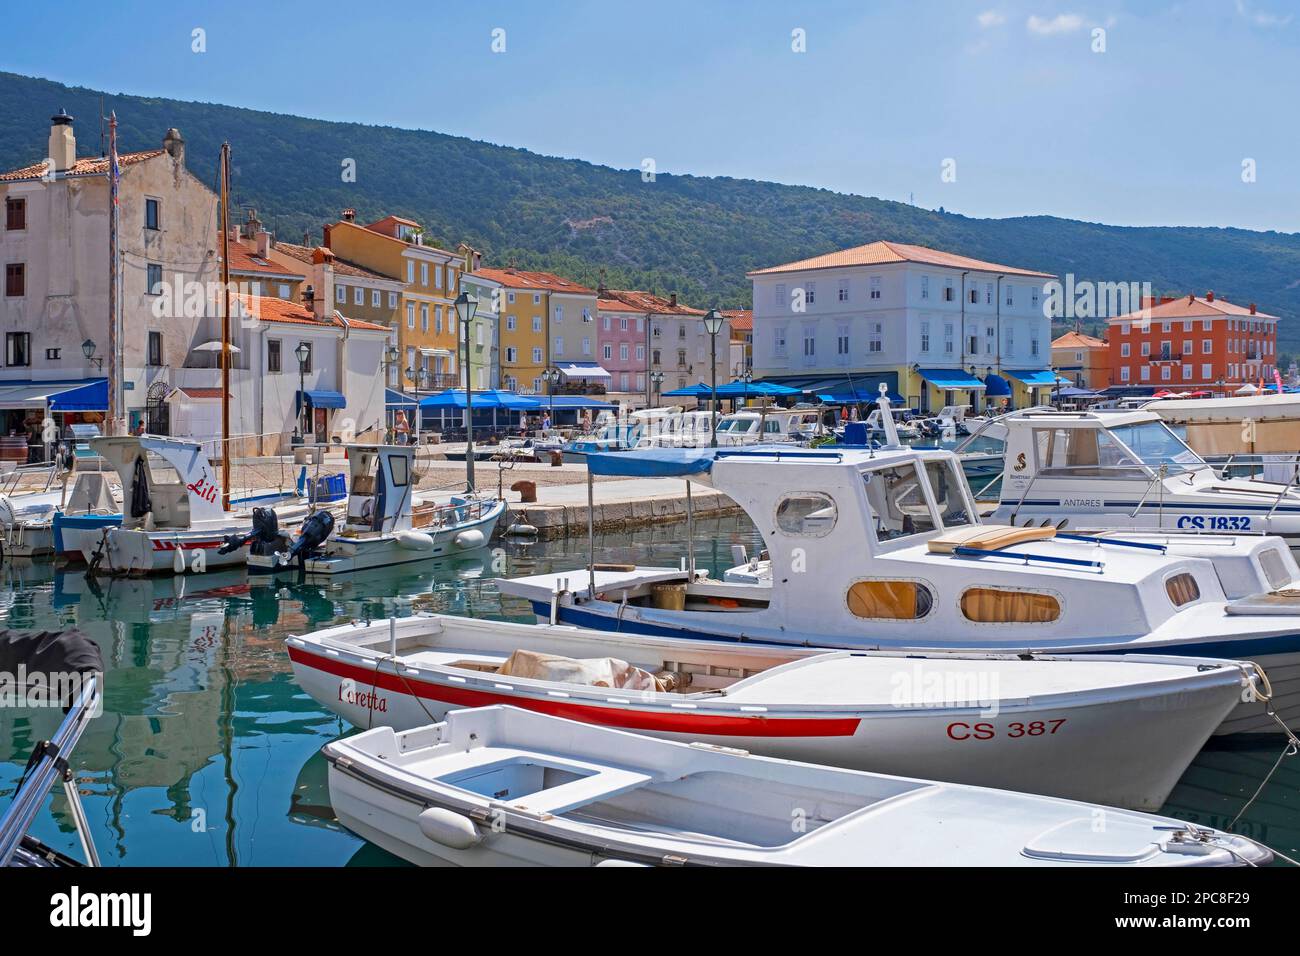 Fishing boats docked in the harbour / port of the town Cres on the island Cherso in the Kvarner Bay, Primorje-Gorski Kotar County, Croatia Stock Photo